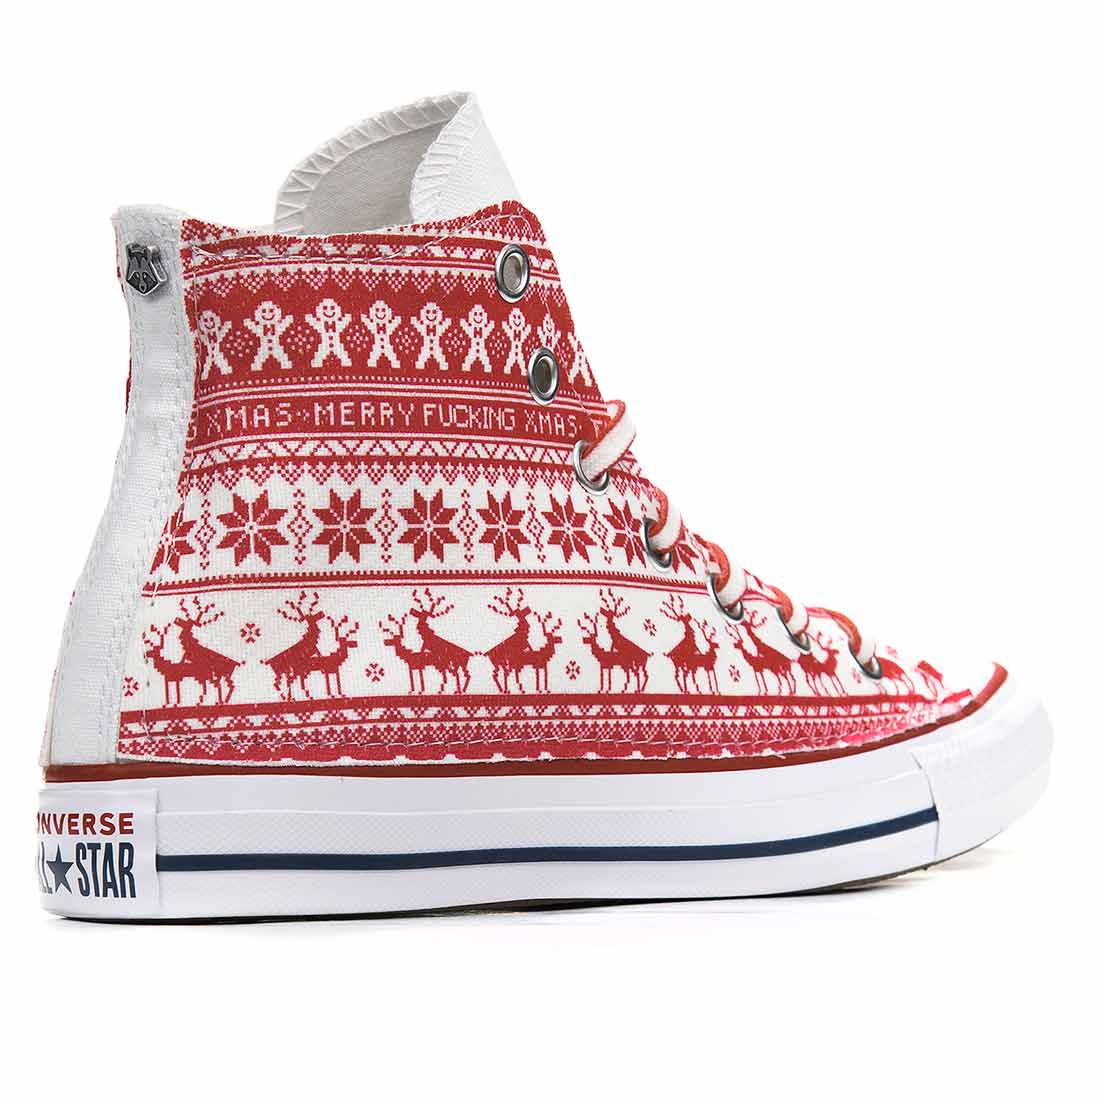 Converse All Star Merry Fucking Christmas